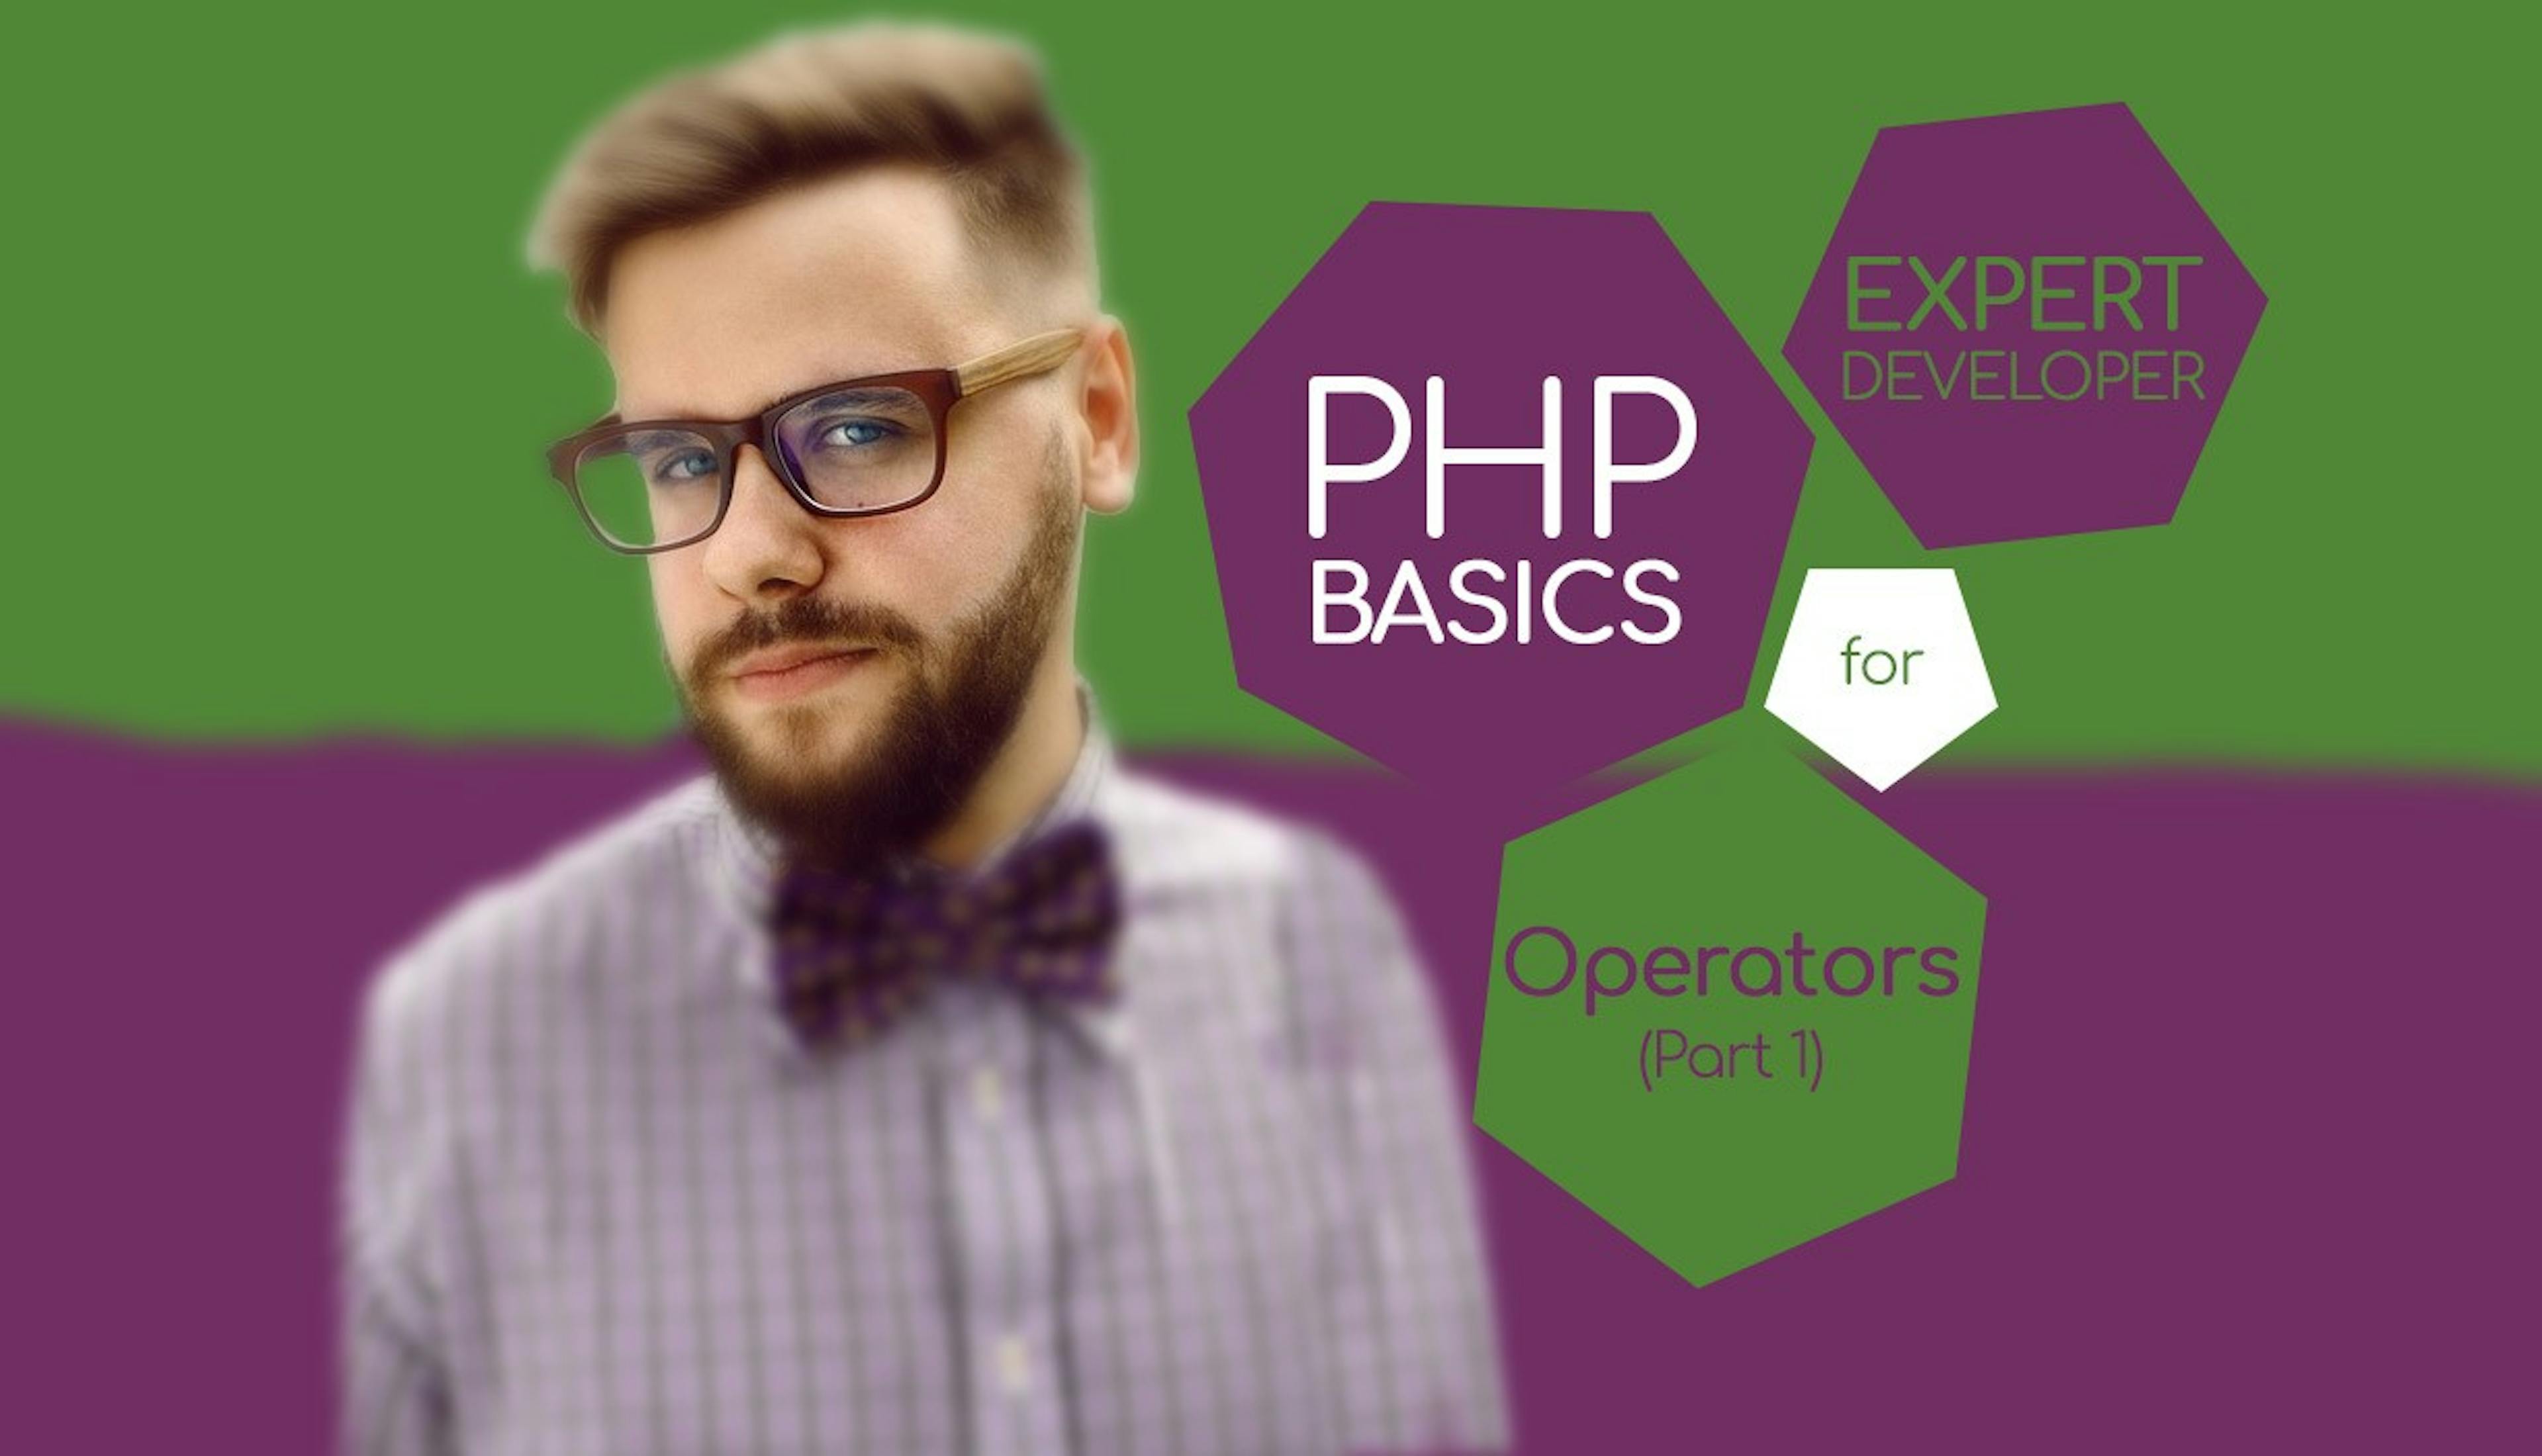 featured image - PHP operators (part 1)